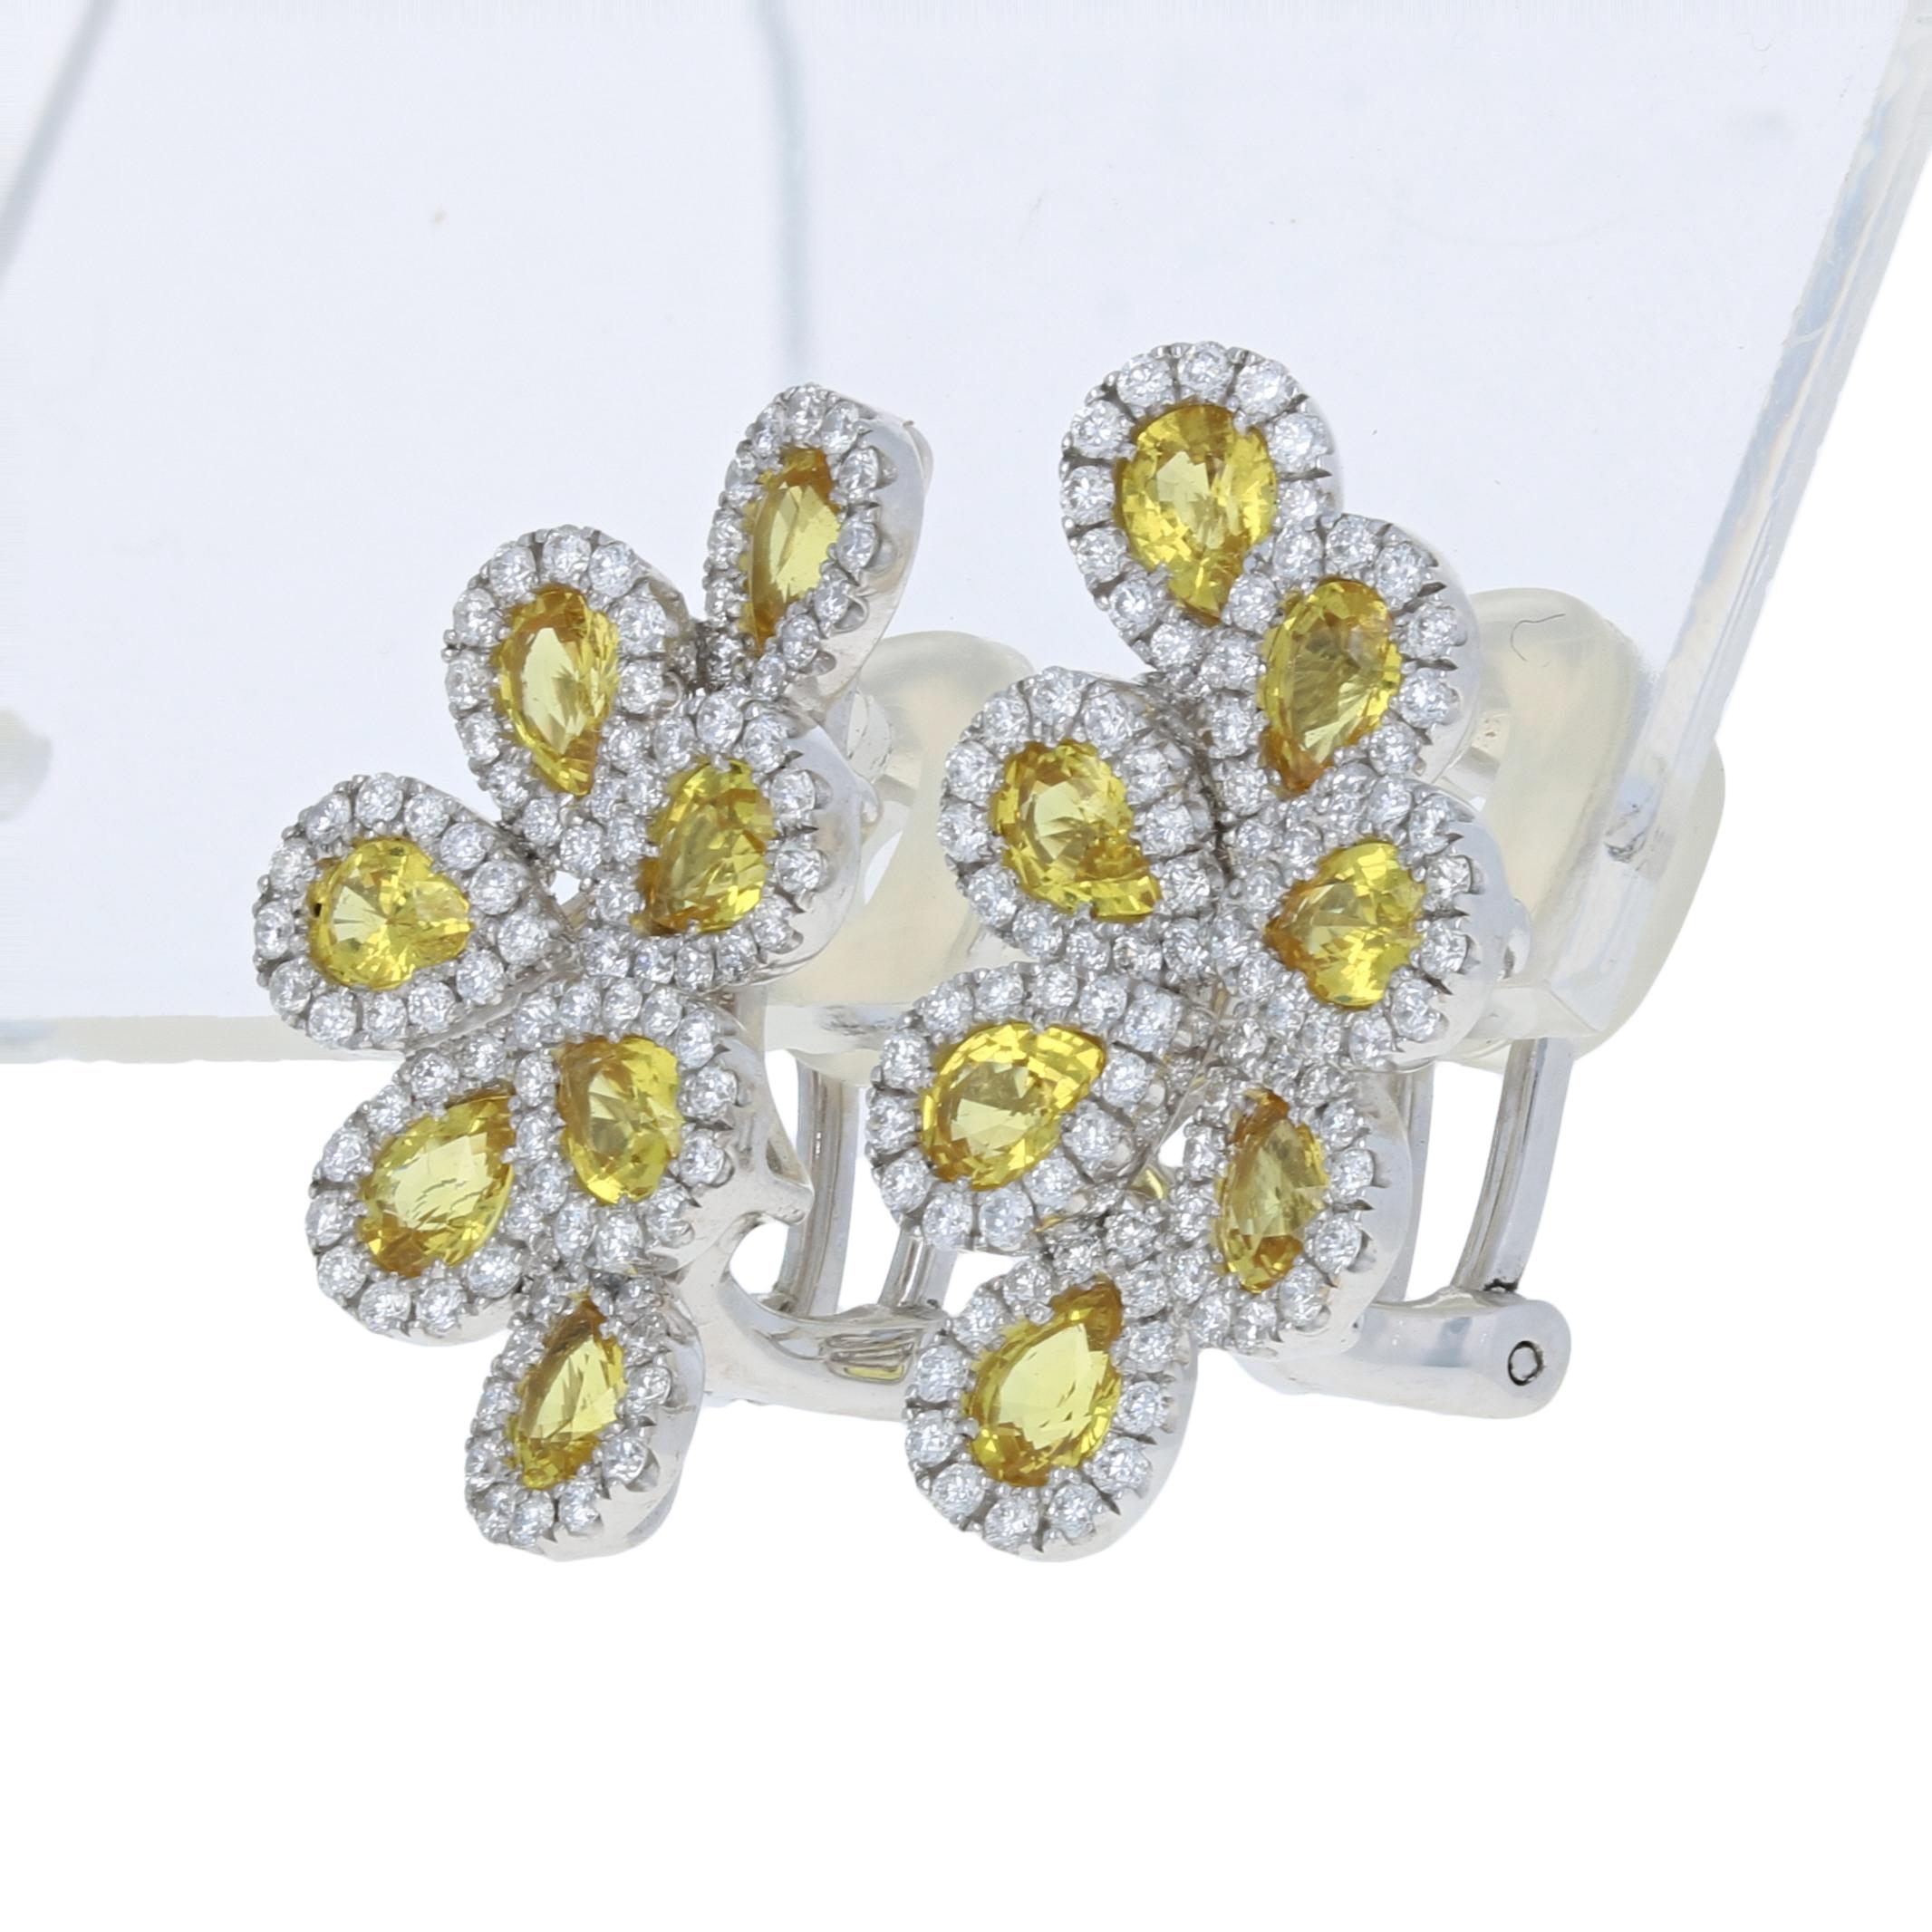 Brand: Spark

Metal Content: Guaranteed 18k Gold as stamped

Stone Information: 
Genuine Sapphires
Treatment: Heating  
Color: Yellow  
Cut: Pear
Carats: 2.80ctw 

Natural Diamonds  
Clarity: VS1 
Color: F  
Cut: Round Brilliant
Carats: 1.01ctw